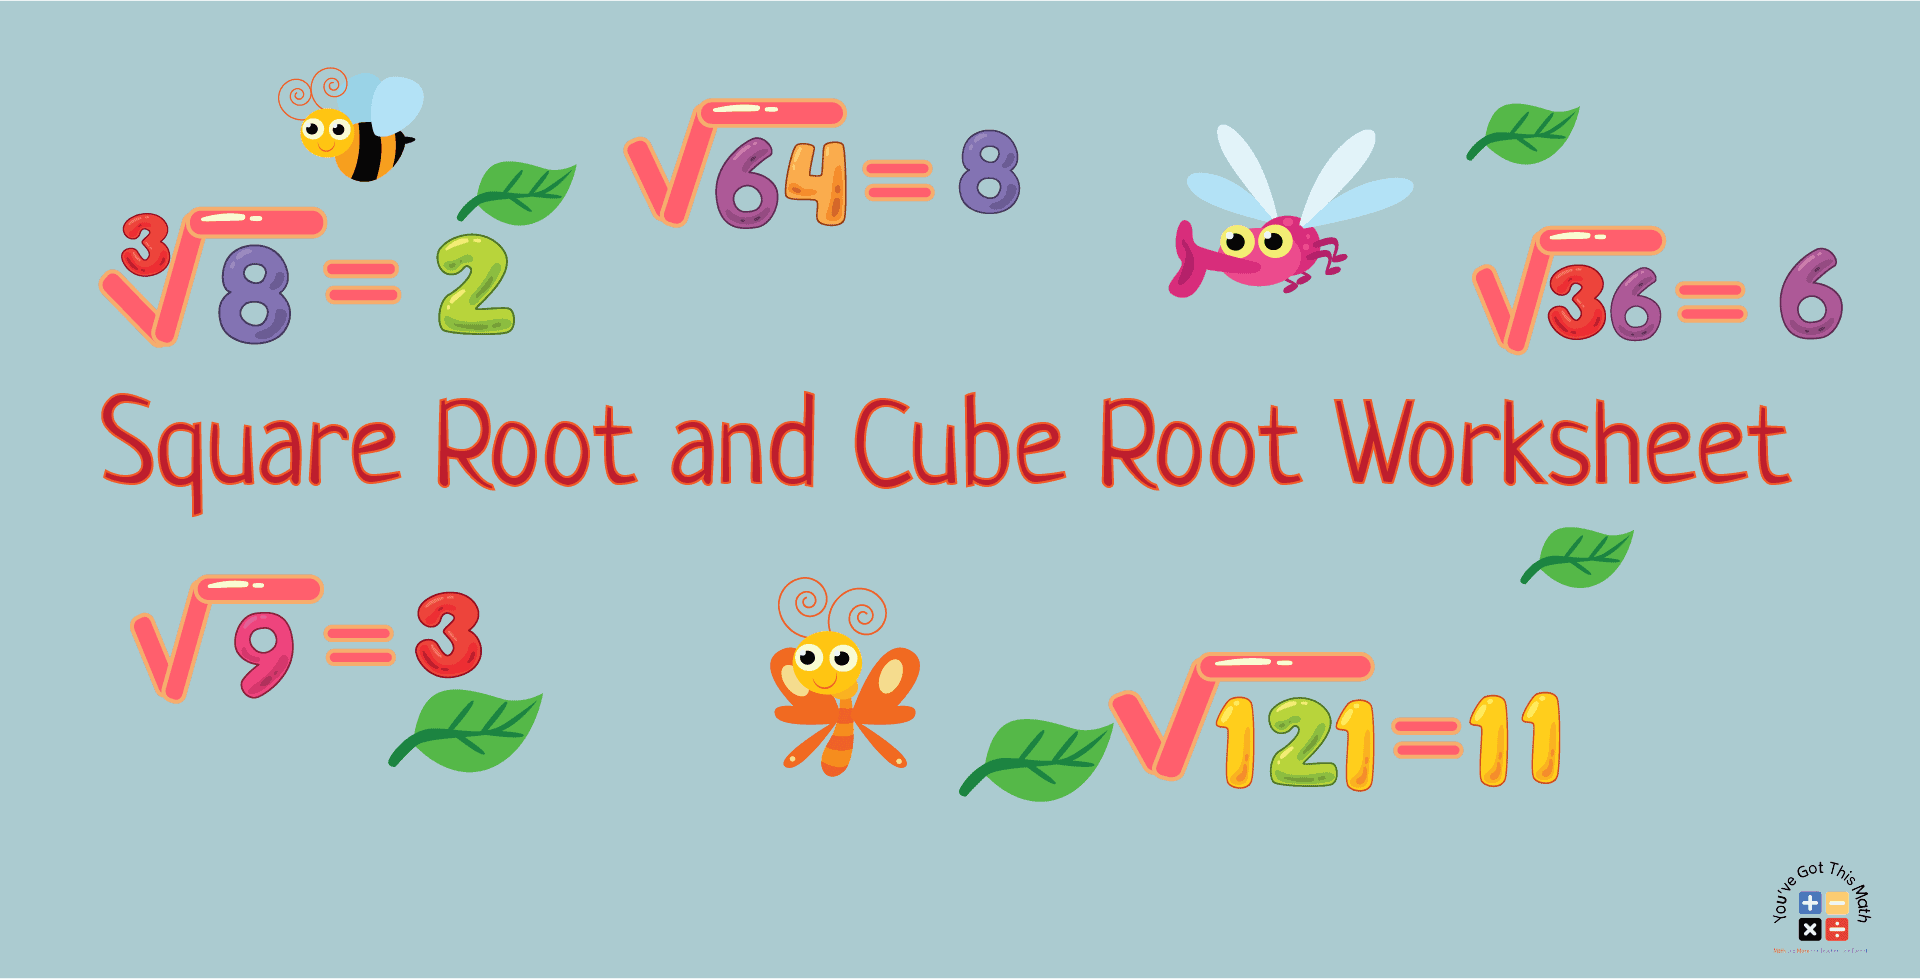 20+ Square Root and Cube Root Worksheet | Free Printable